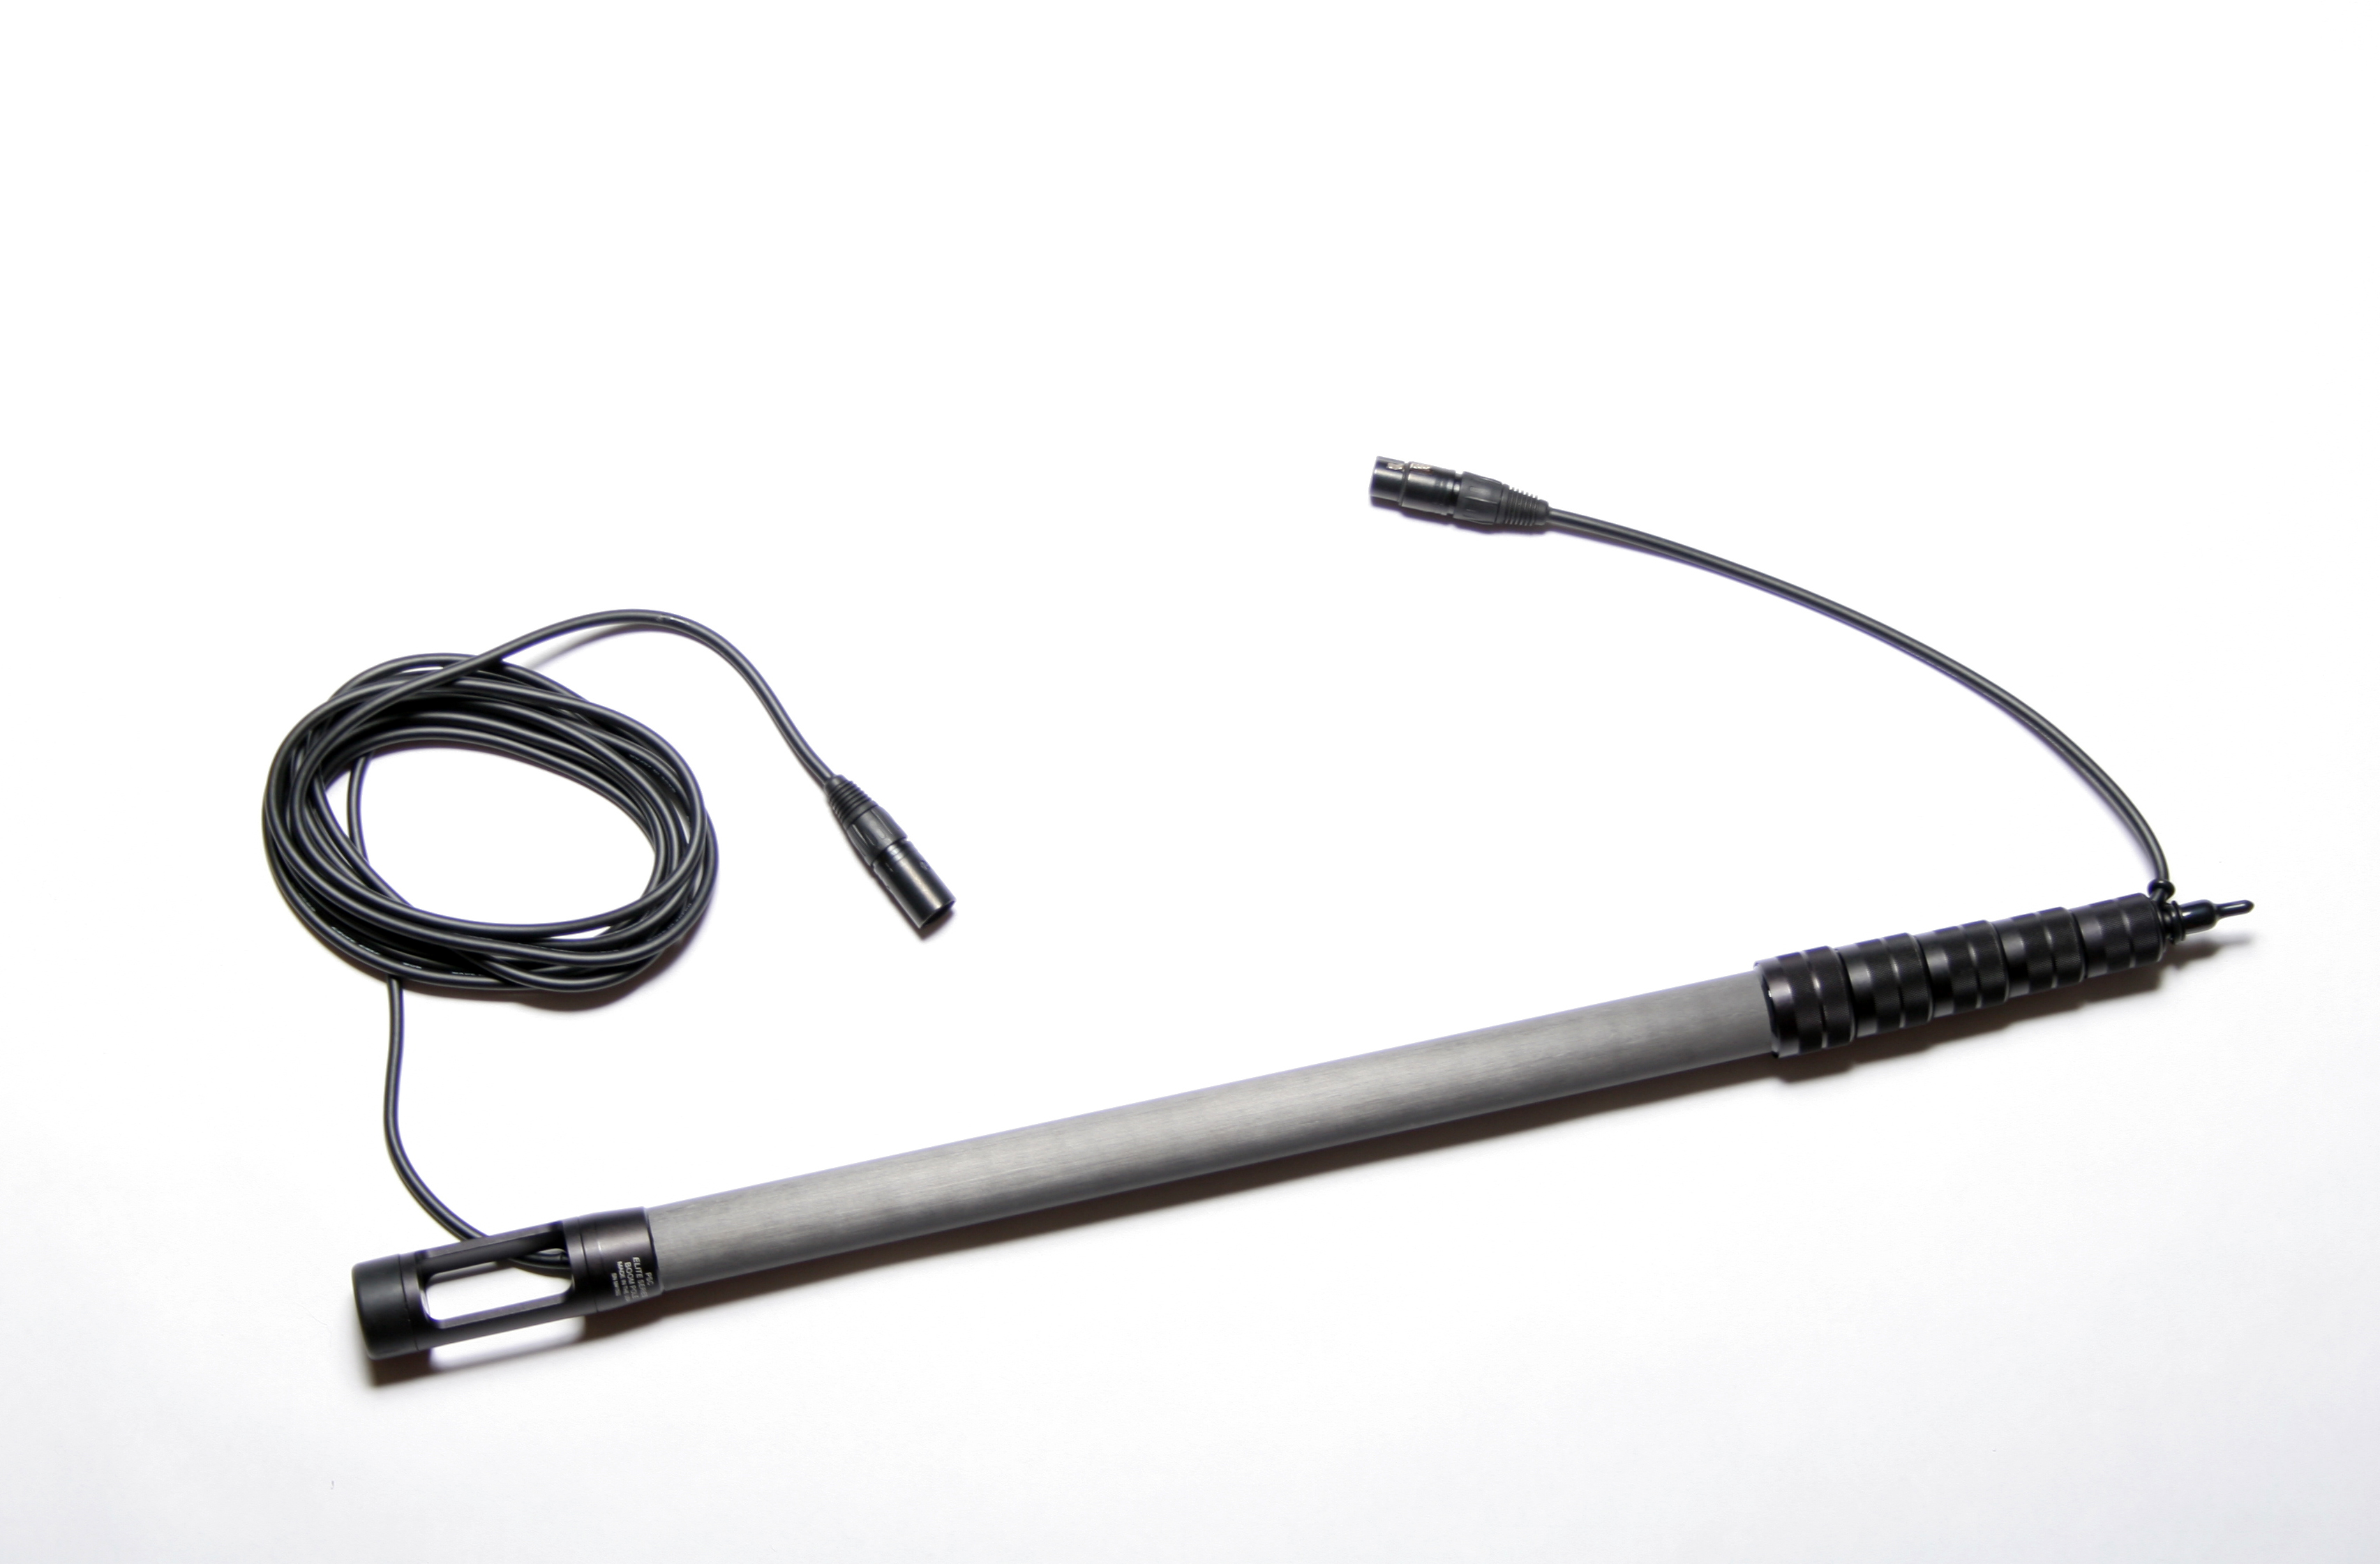 Medium PSC Elite Boom Pole with straight cable